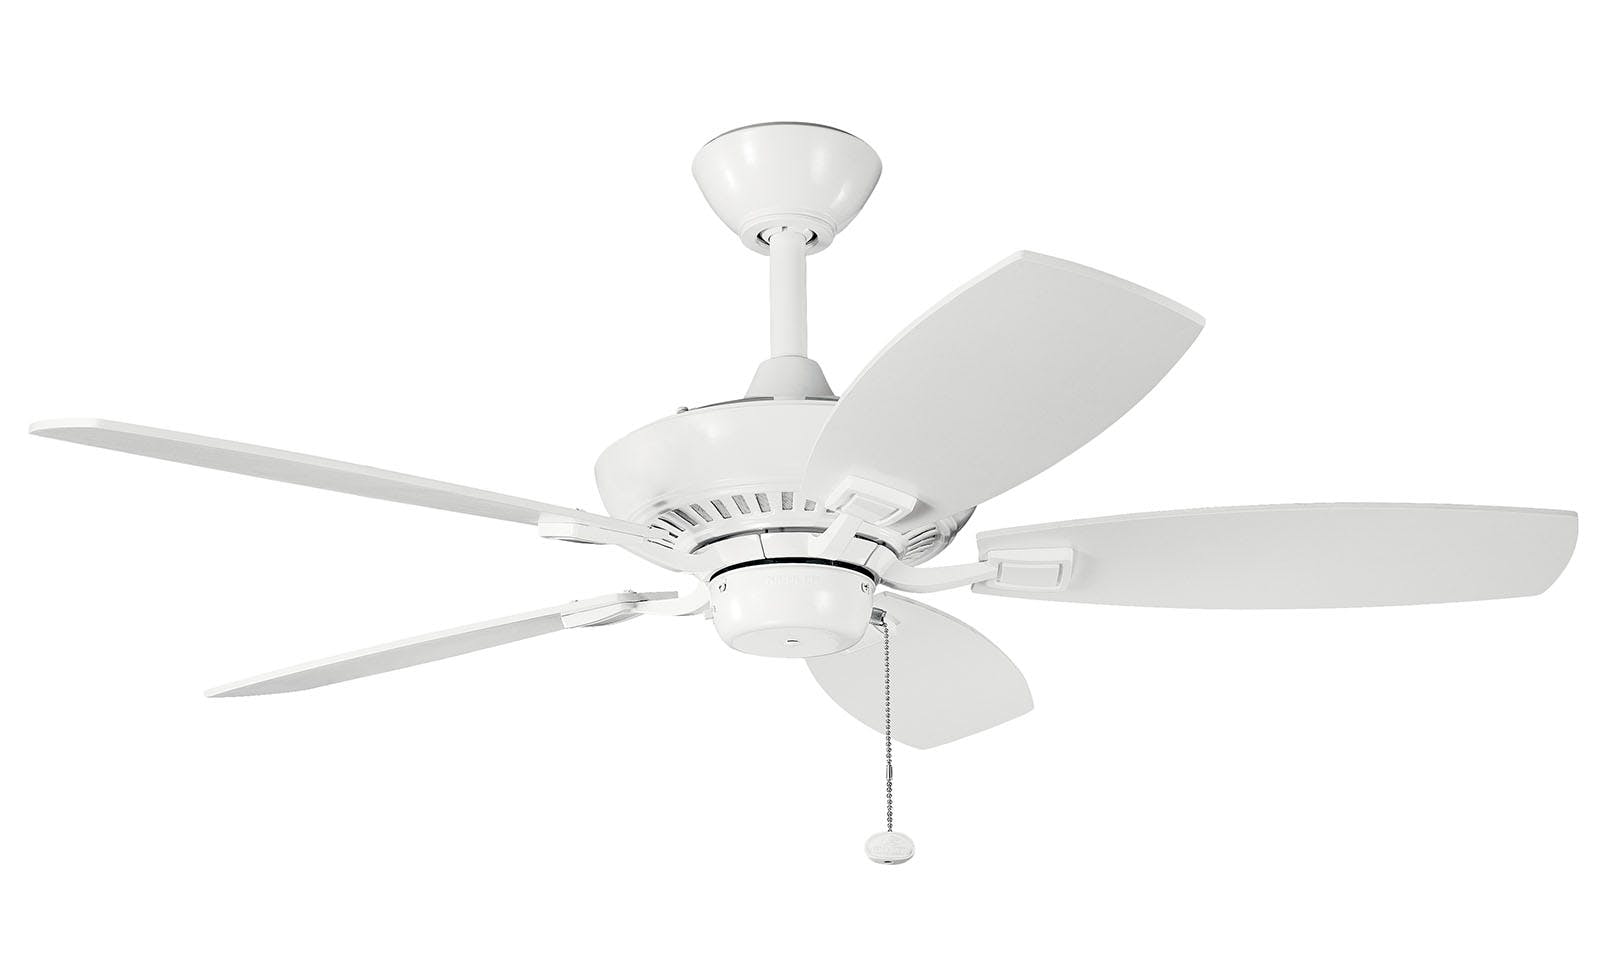 Canfield 44" Ceiling Fan in White on a white background